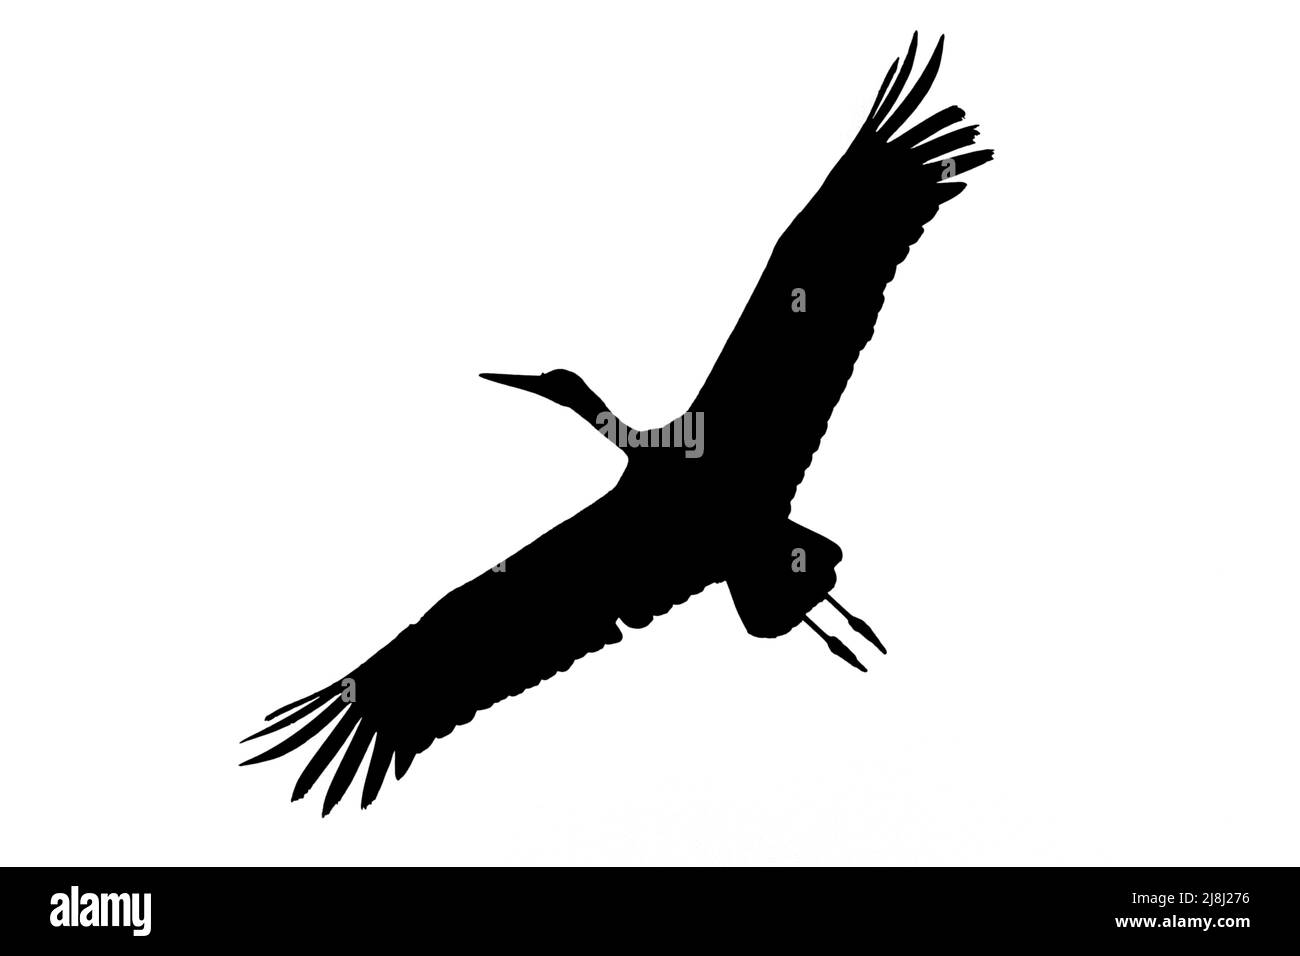 Silhouette of soaring white stork (Ciconia ciconia) in flight outlined against white background to show wings, head and tail shapes Stock Photo